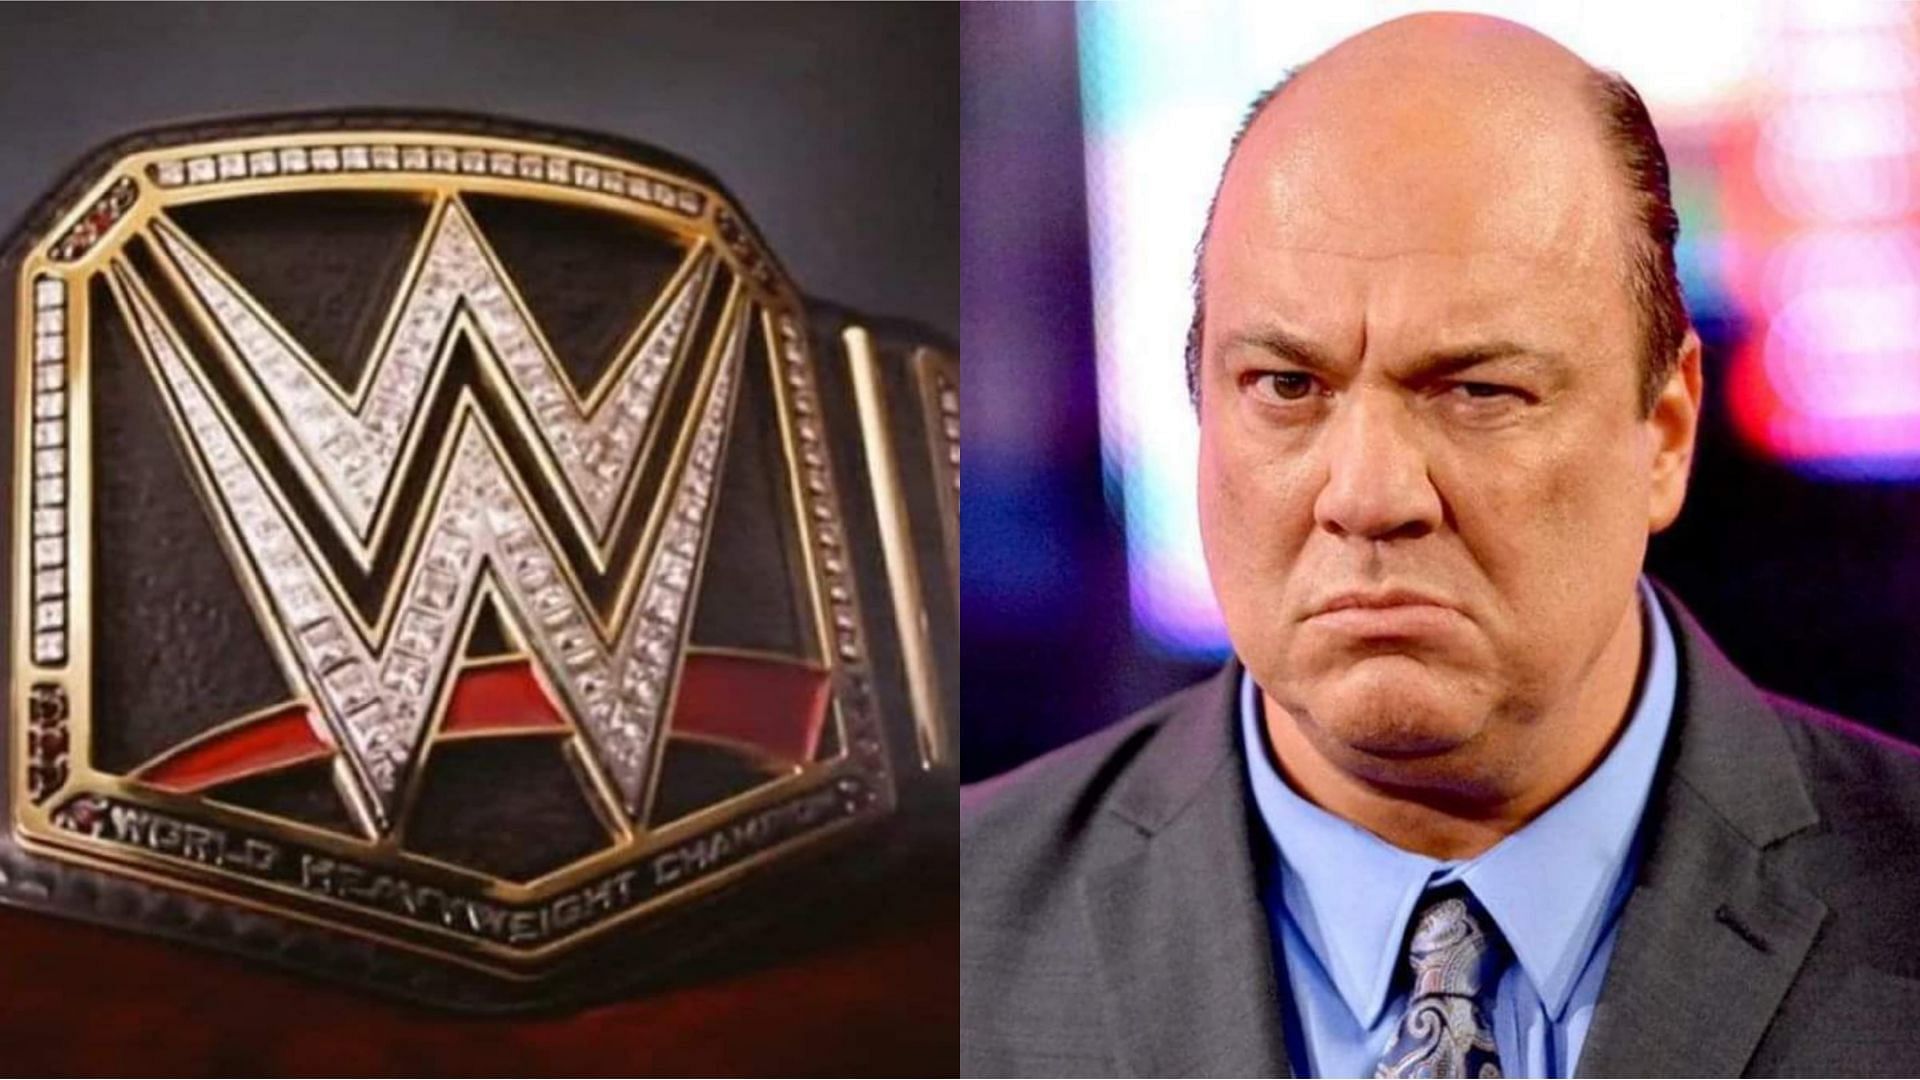 Paul Heyman currently serves as special counsel to Roman Reigns.